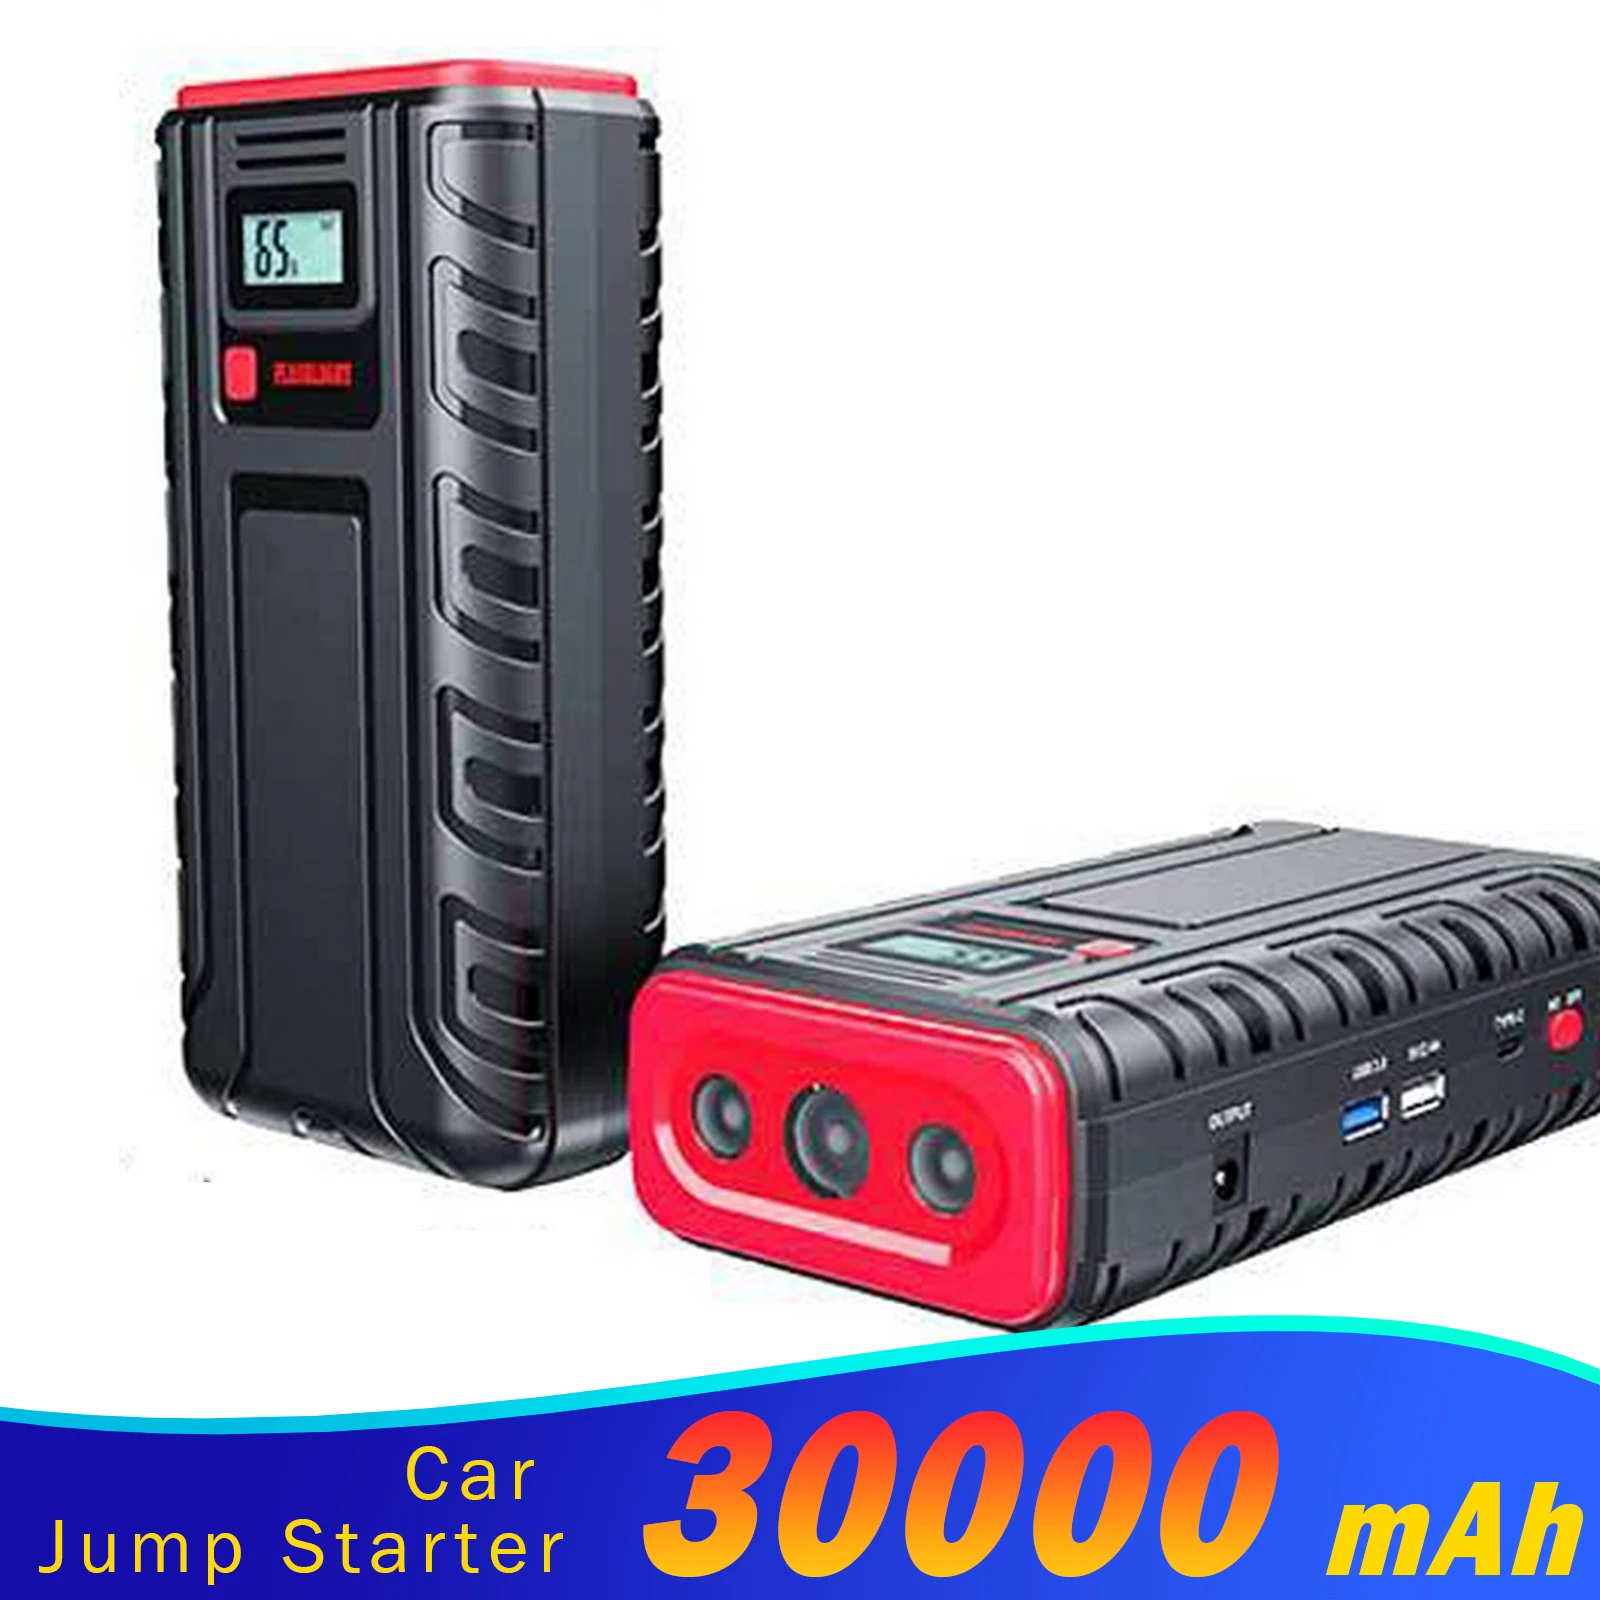 

Starting Car Cost Car Jump Starter Battery Charger Power Bank Cute Starting Device 12v Mini Booster Electrical Ignition Parts